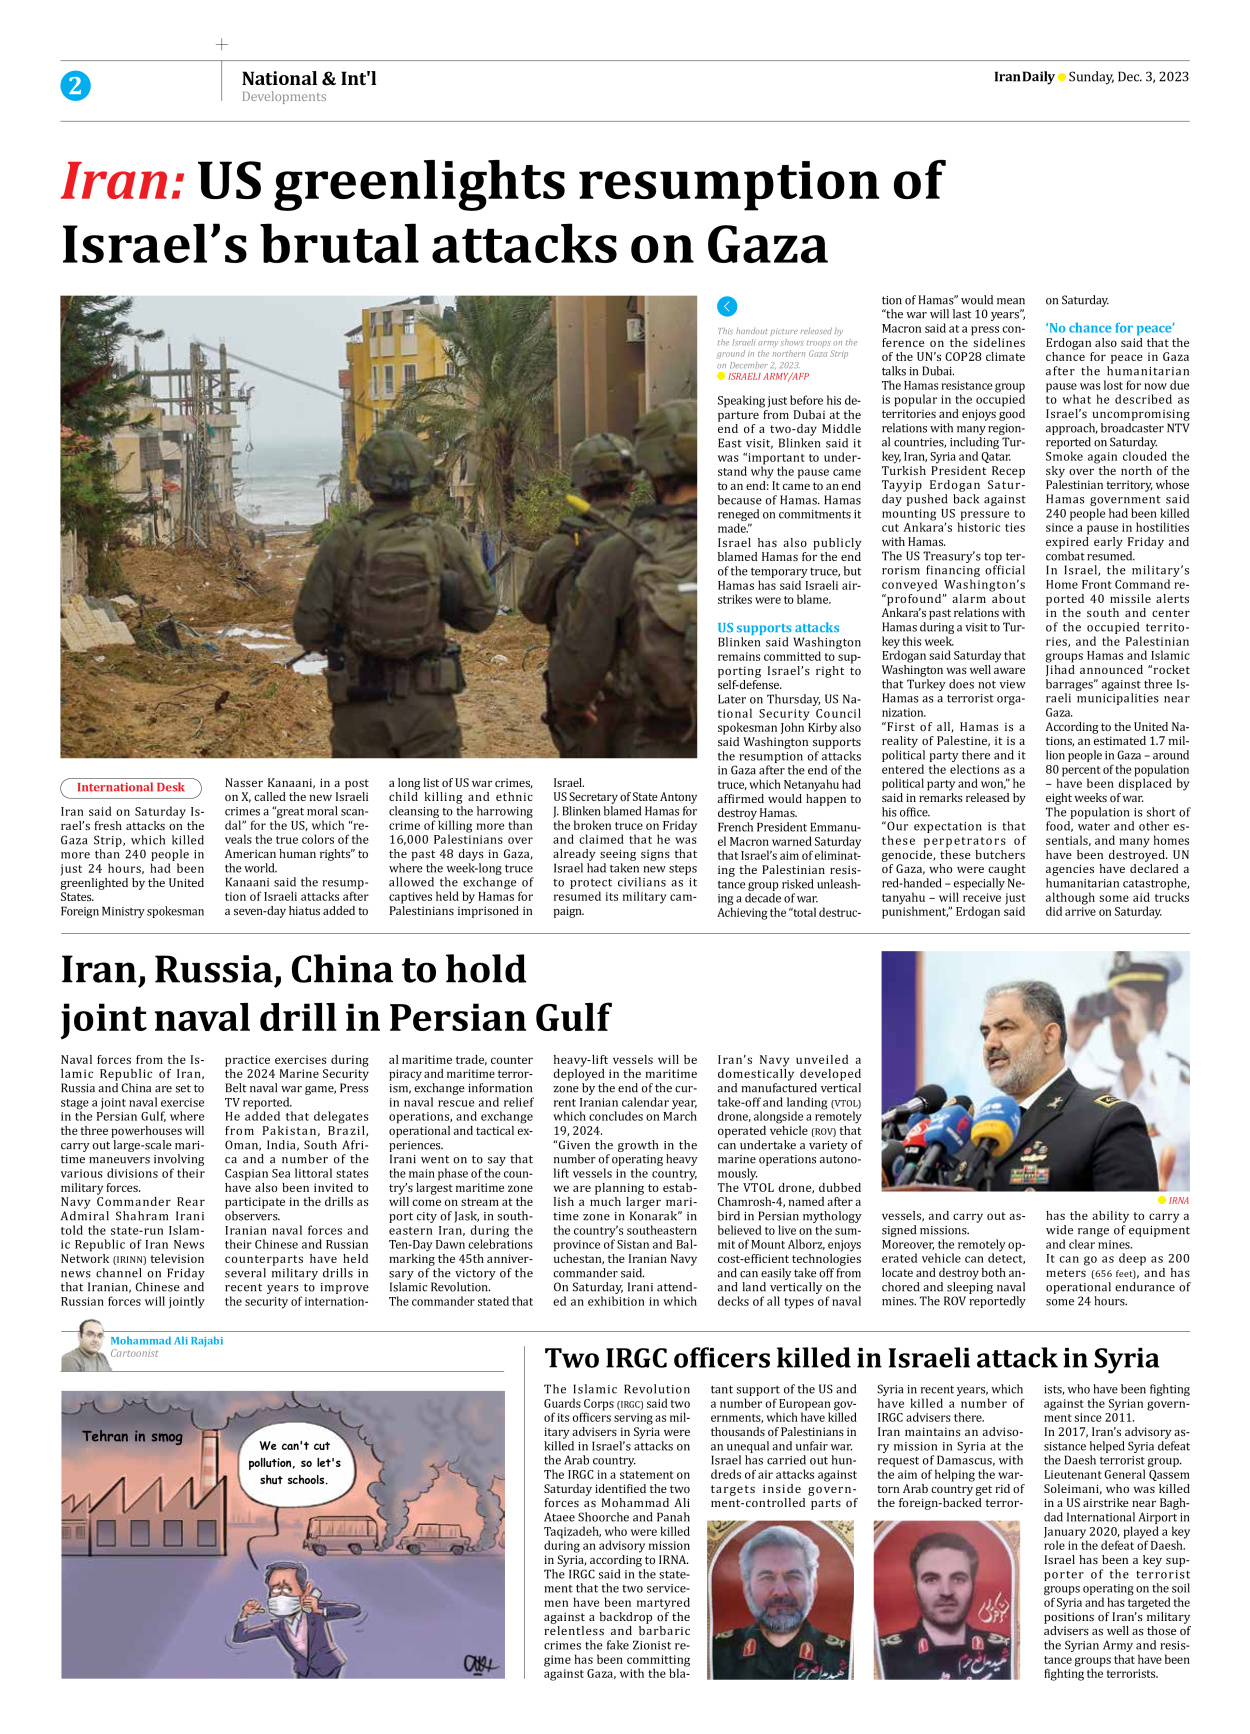 Iran Daily - Number Seven Thousand Four Hundred and Fifty - 03 December 2023 - Page 2